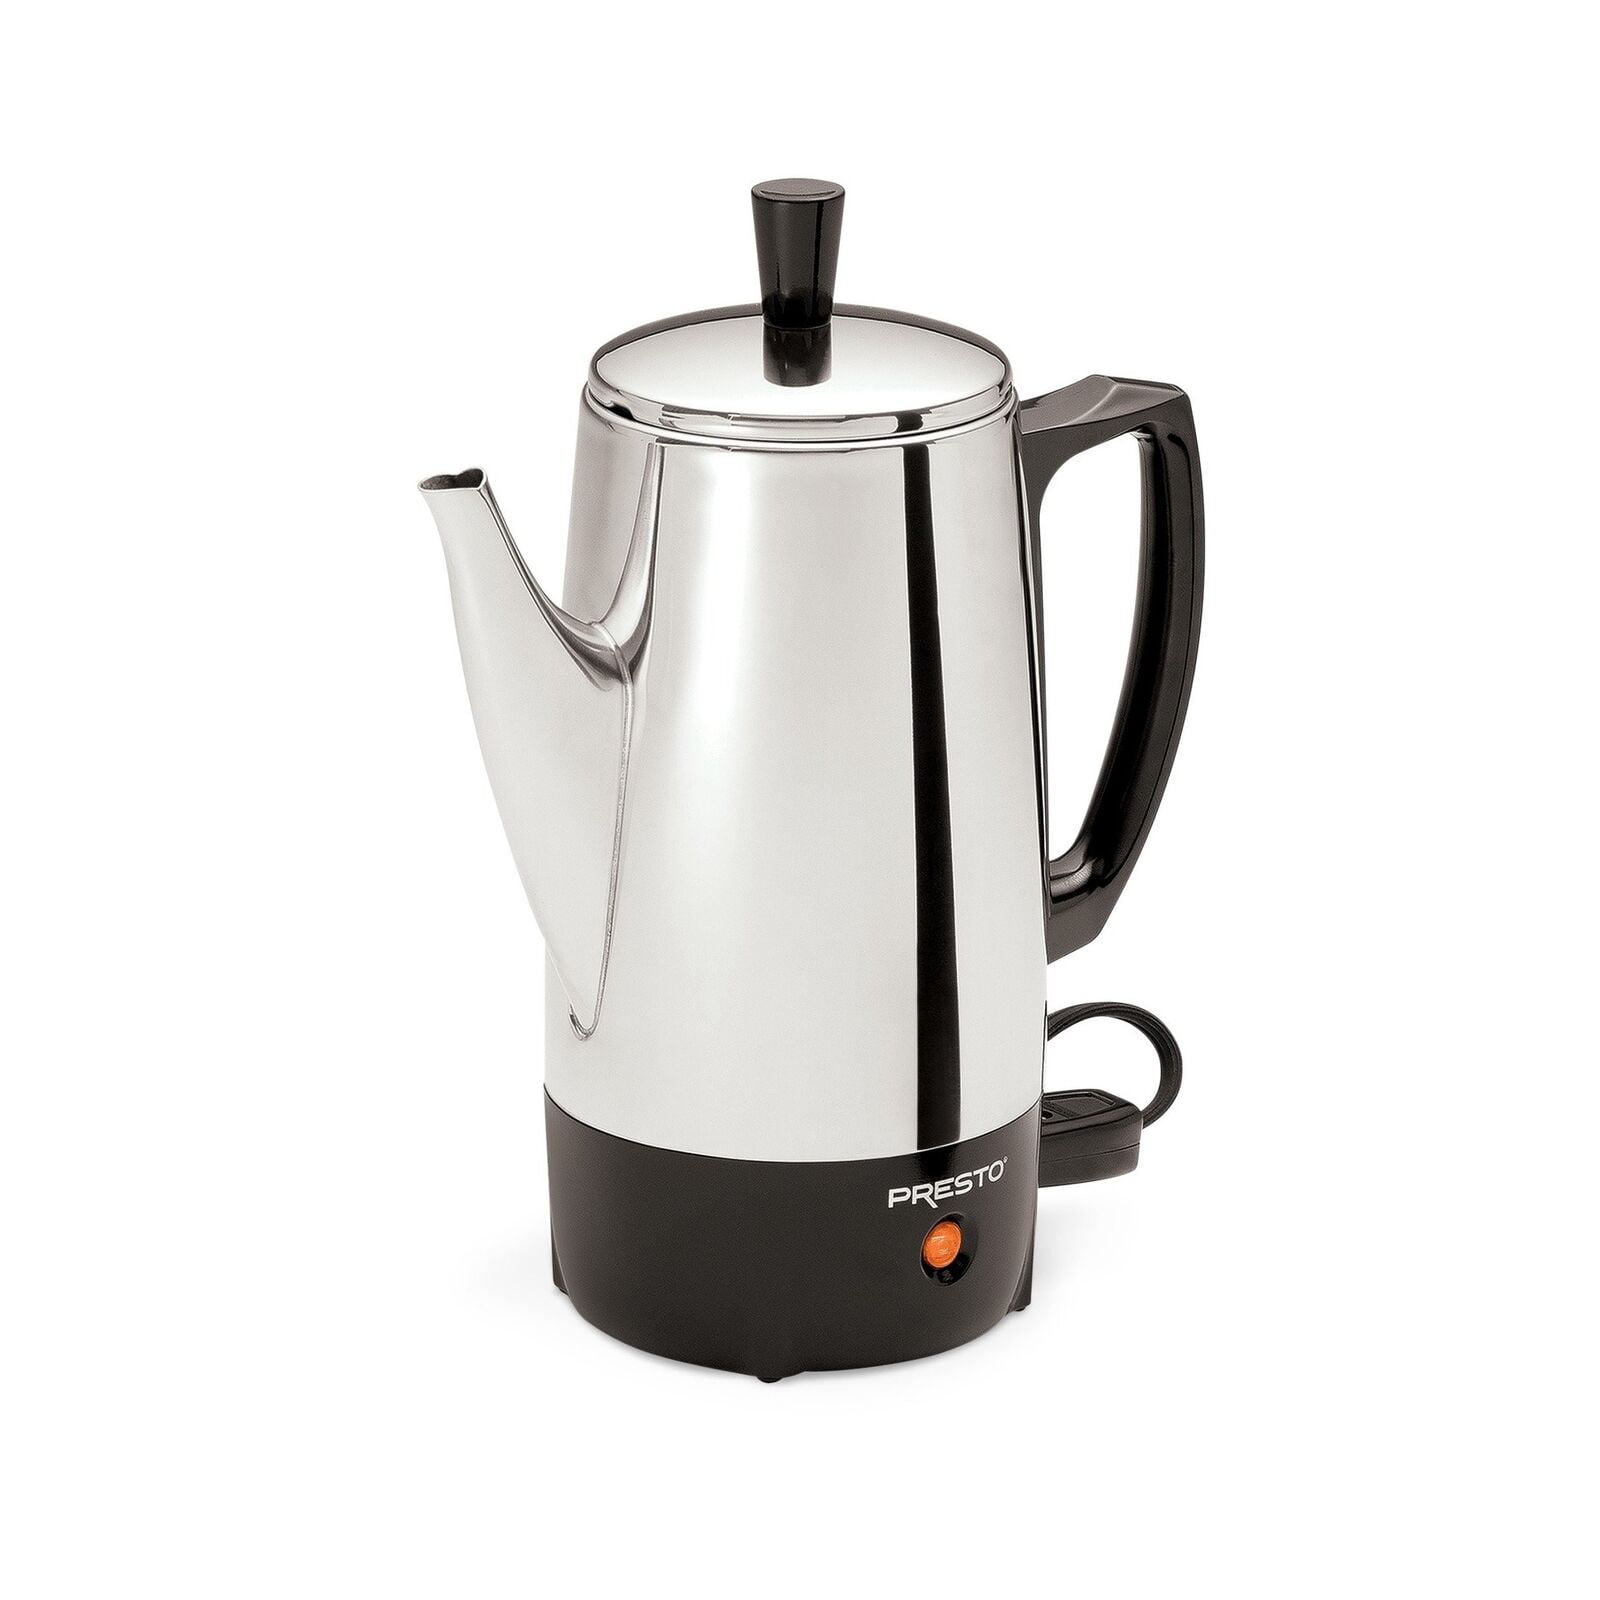 Presto 02822 6-Cup Stainless-Steel Coffee Percolator Silver 6 Cup 